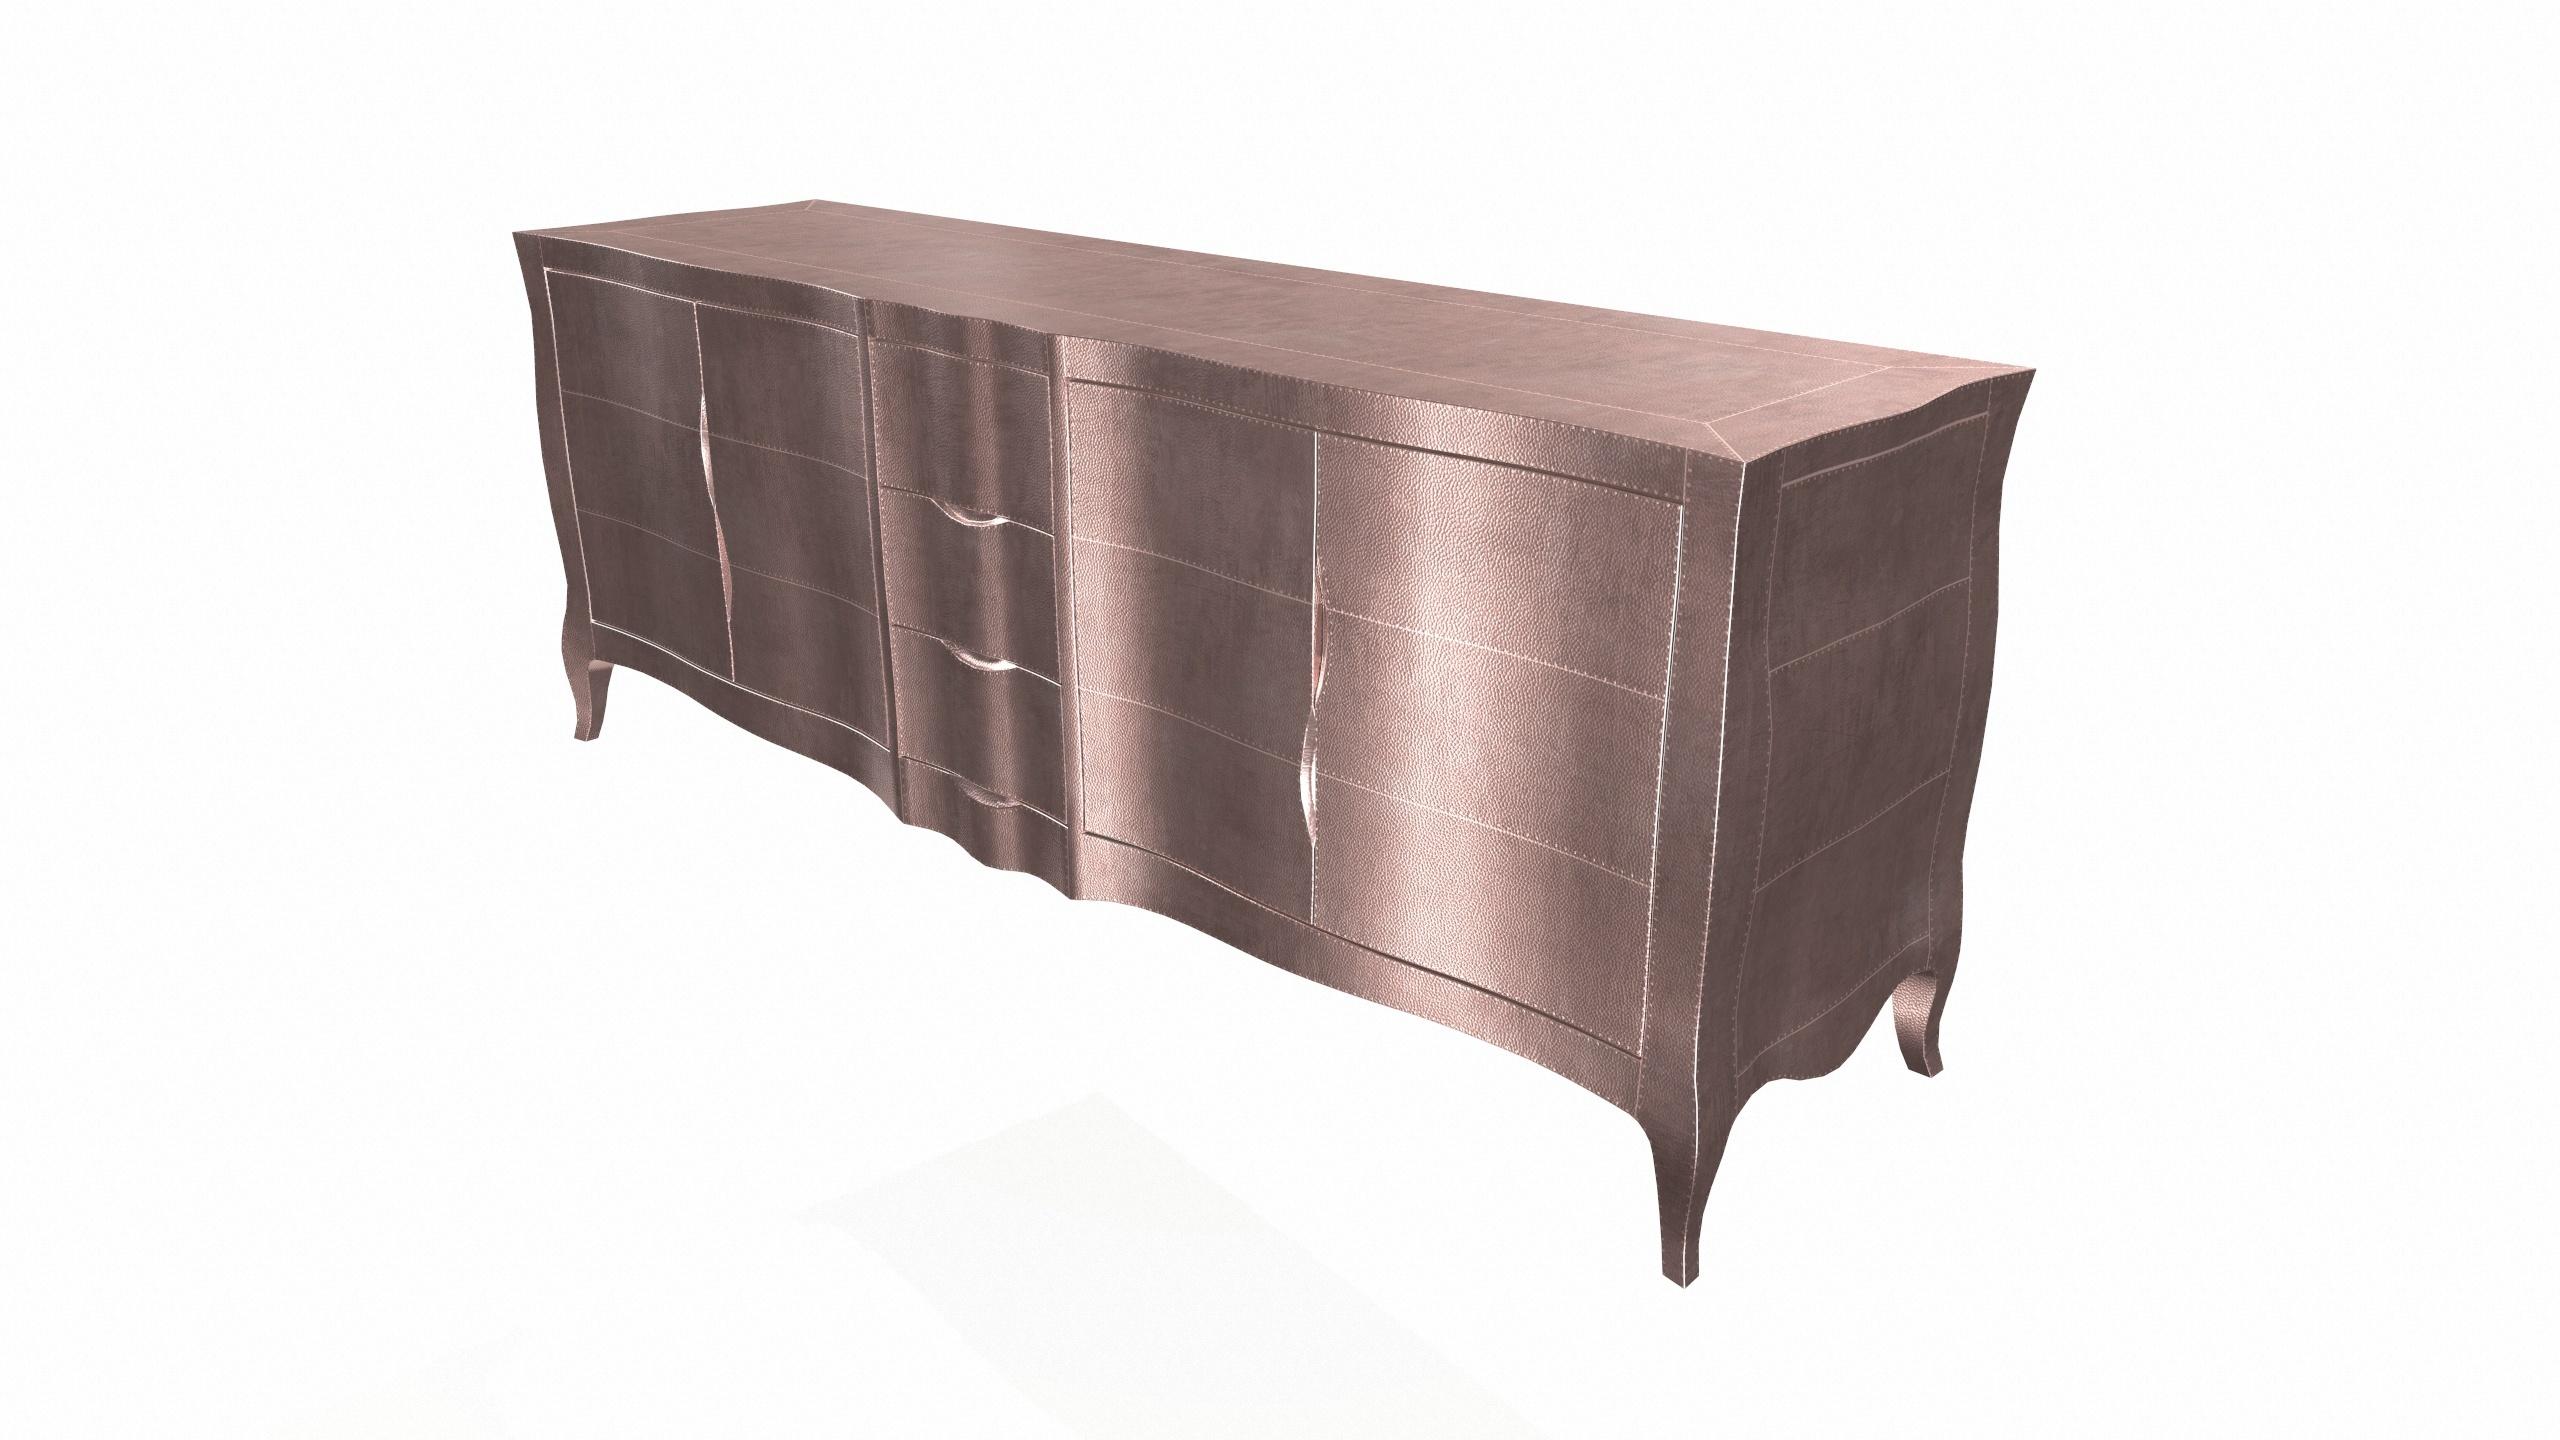 American Louise Credenza Art Deco Bookcases in Mid. Hammered Copper by Paul Mathieu For Sale